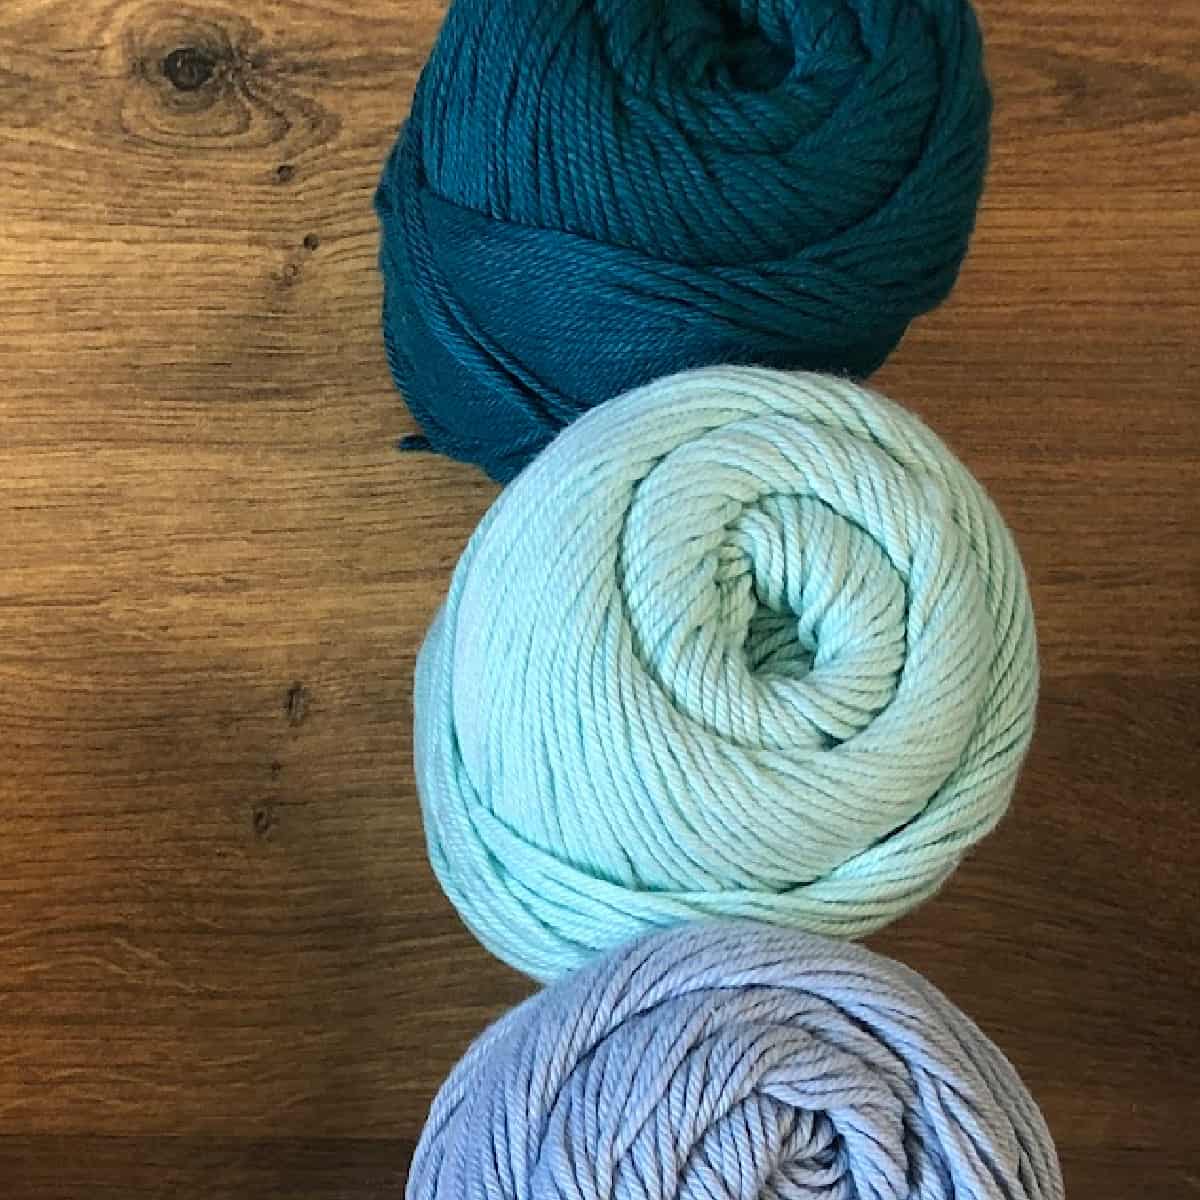 Cotton yarn teal, mint and blue.